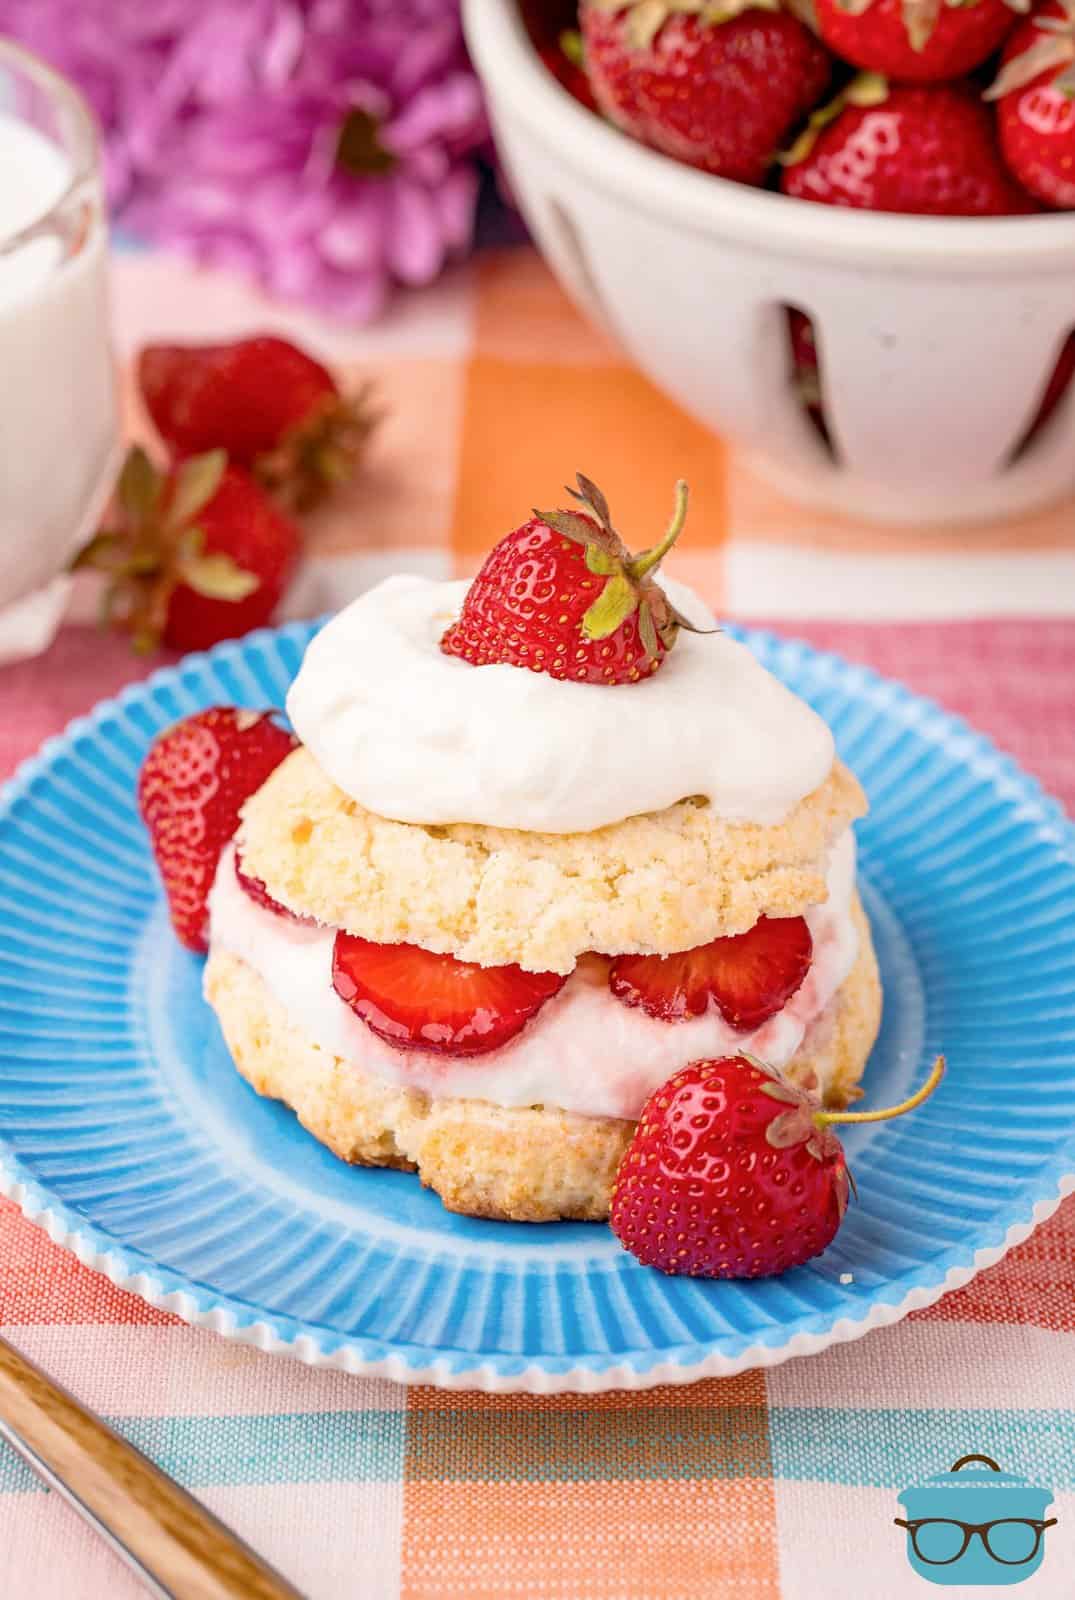 strawberry shortcake cut in half with whipped cream and strawberries layered in the middle all set on a blue plate.